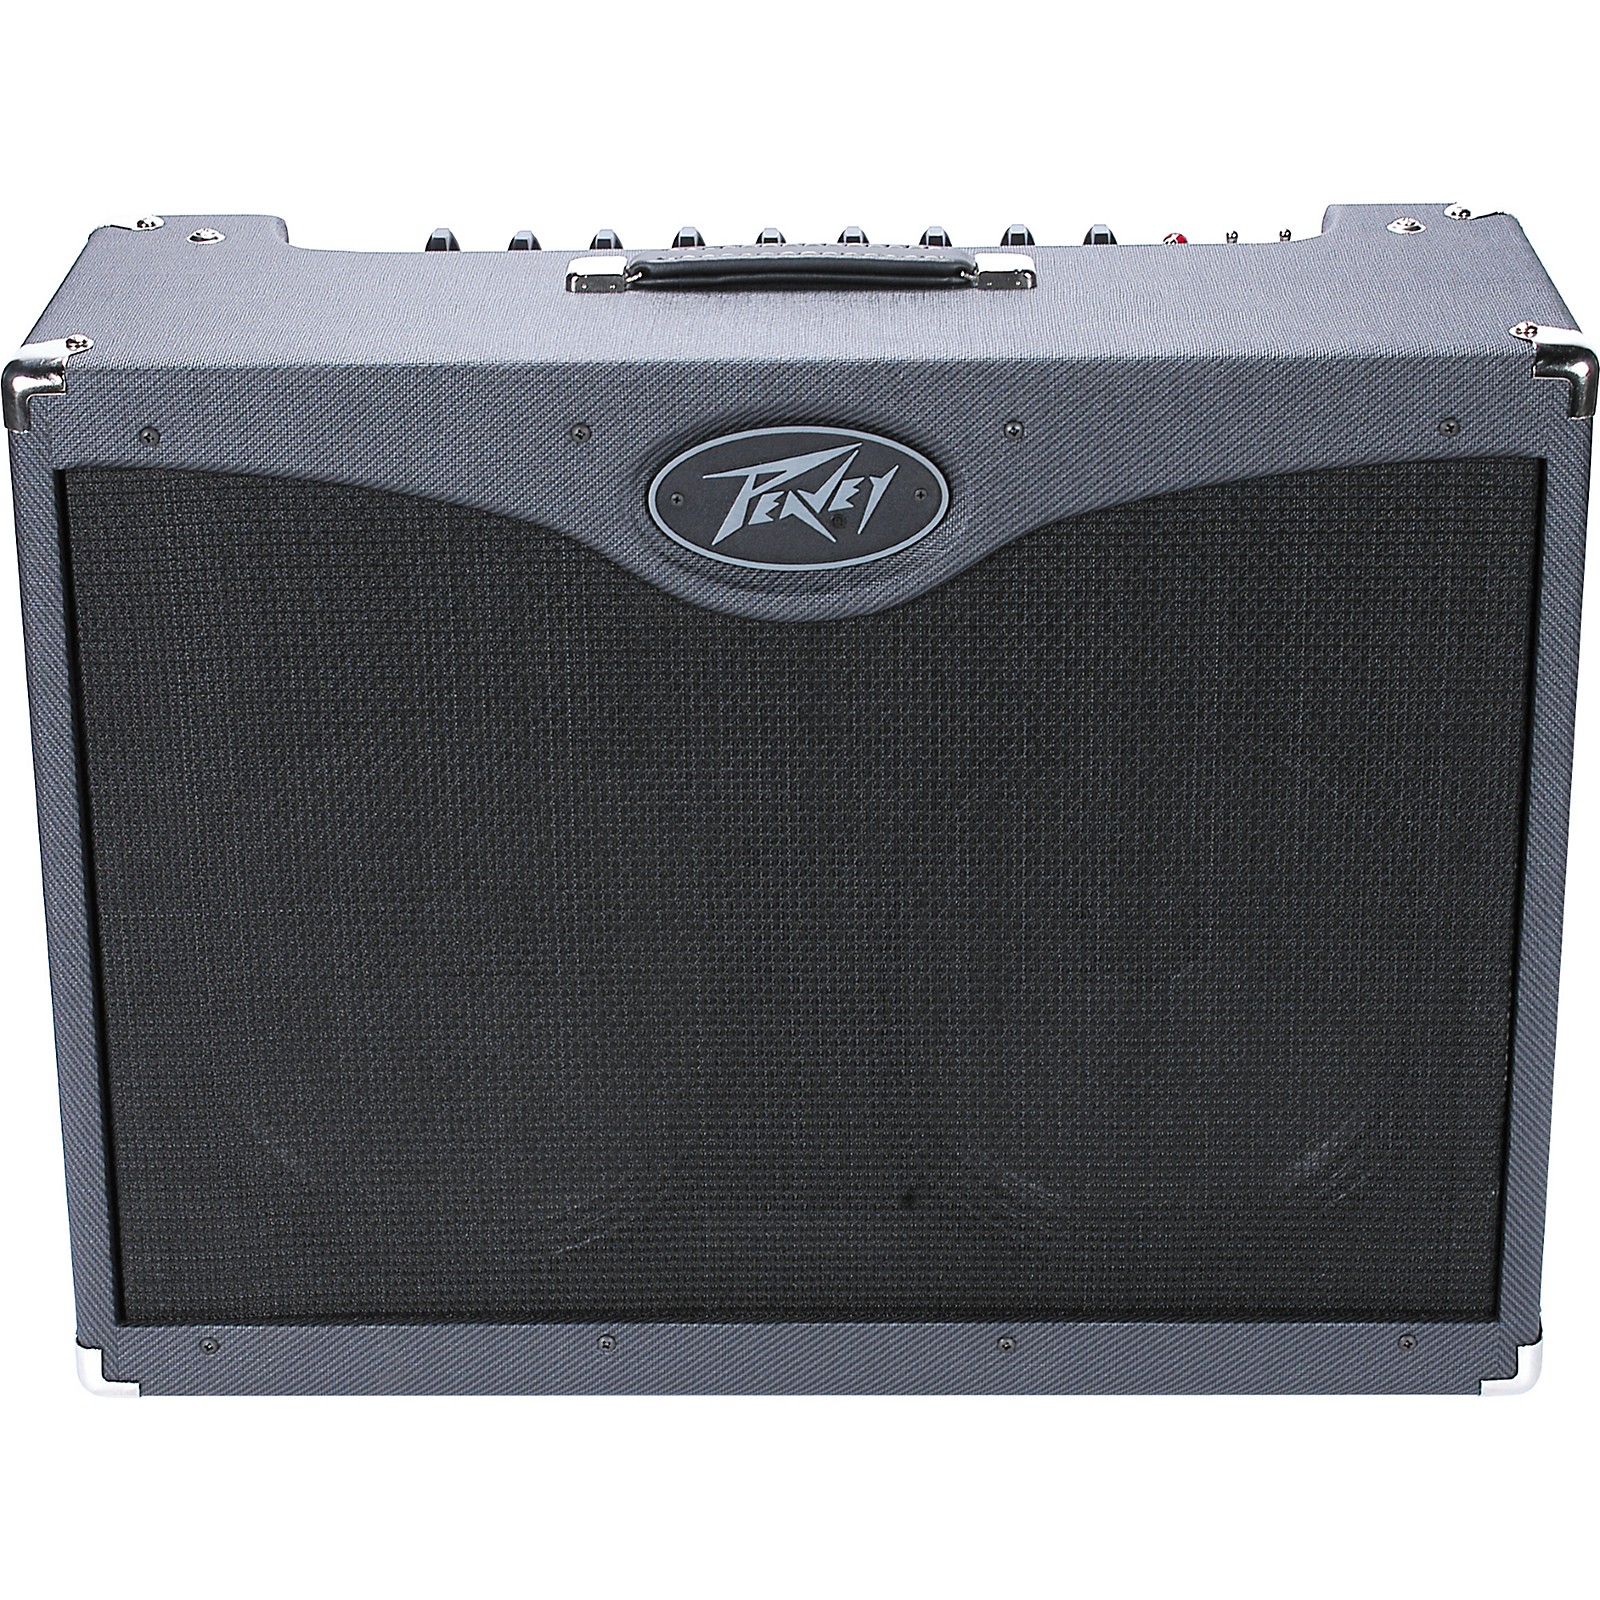 how good are peavey amps